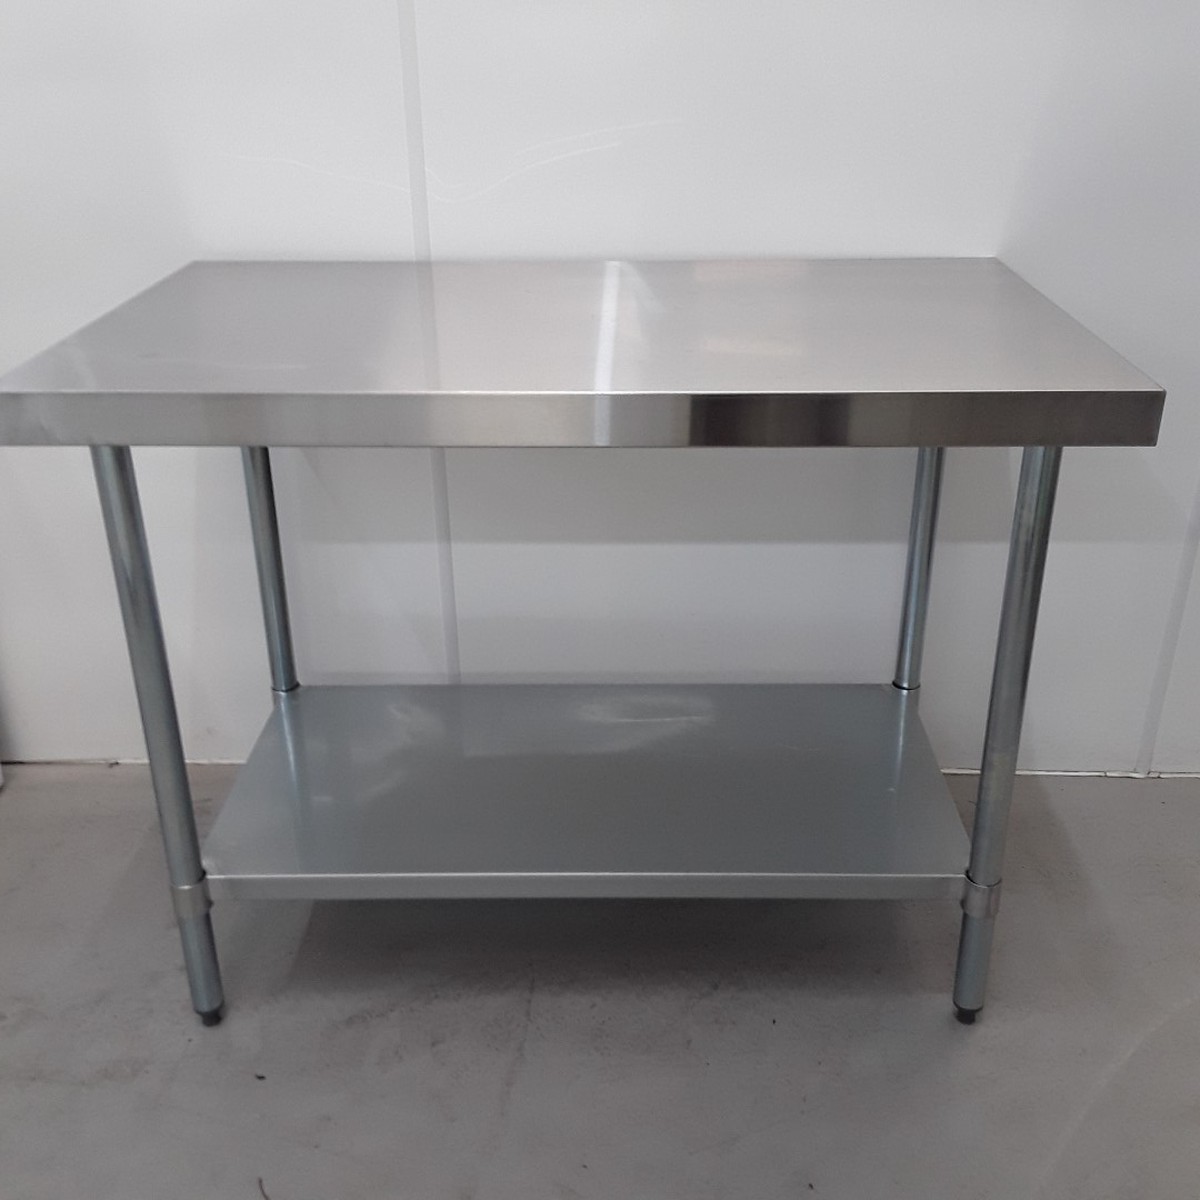 120cm X 70cm Stainless Steel Table 185 